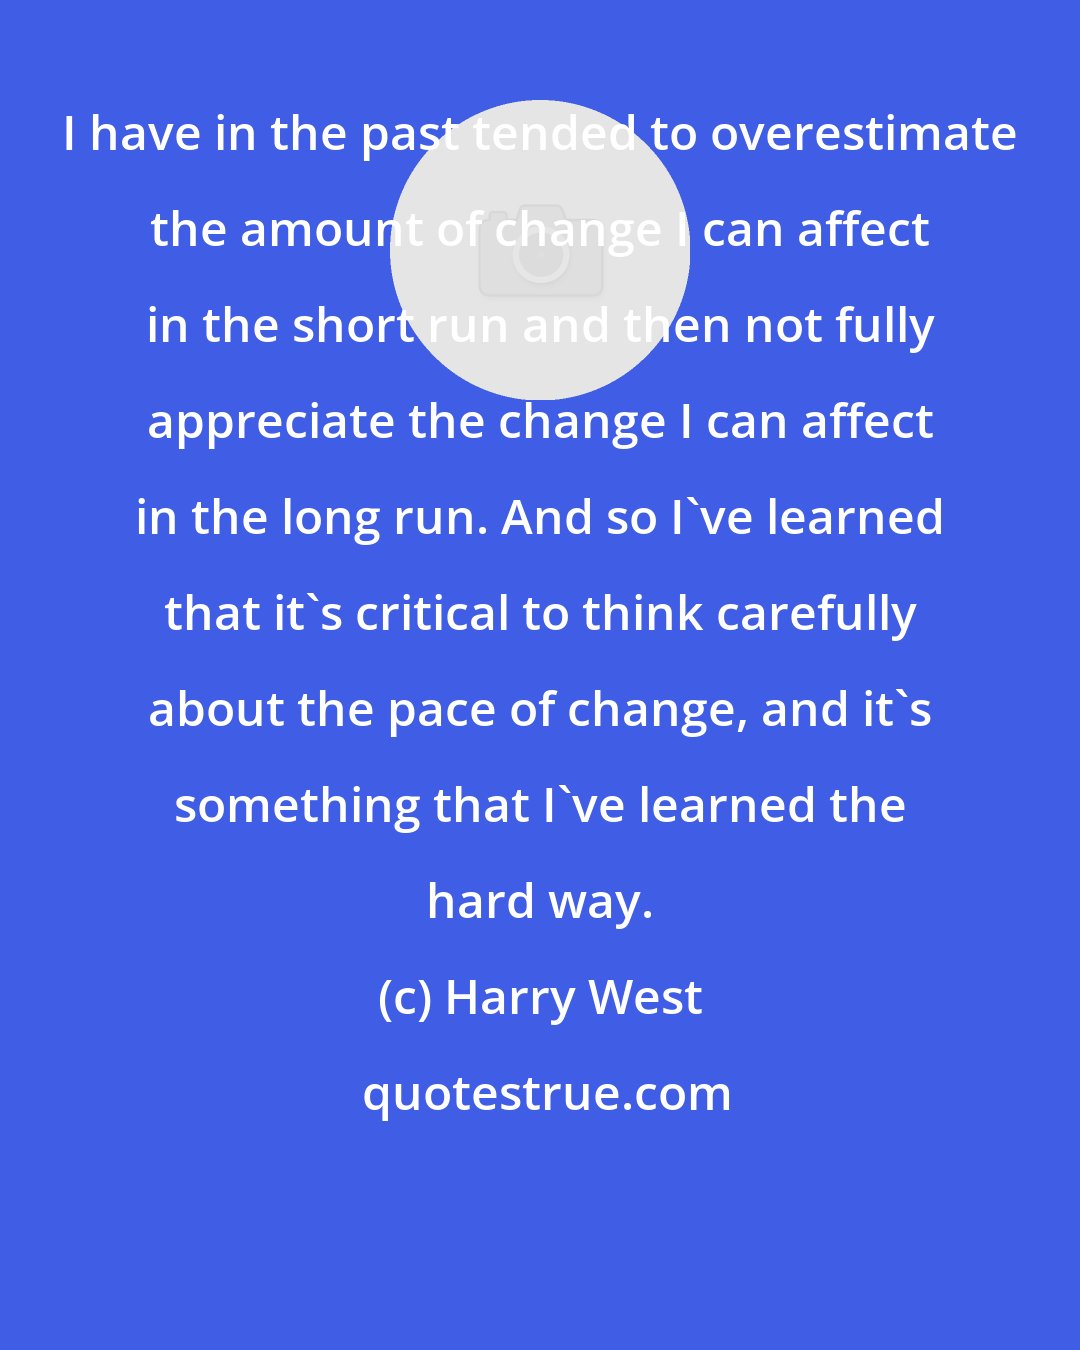 Harry West: I have in the past tended to overestimate the amount of change I can affect in the short run and then not fully appreciate the change I can affect in the long run. And so I've learned that it's critical to think carefully about the pace of change, and it's something that I've learned the hard way.